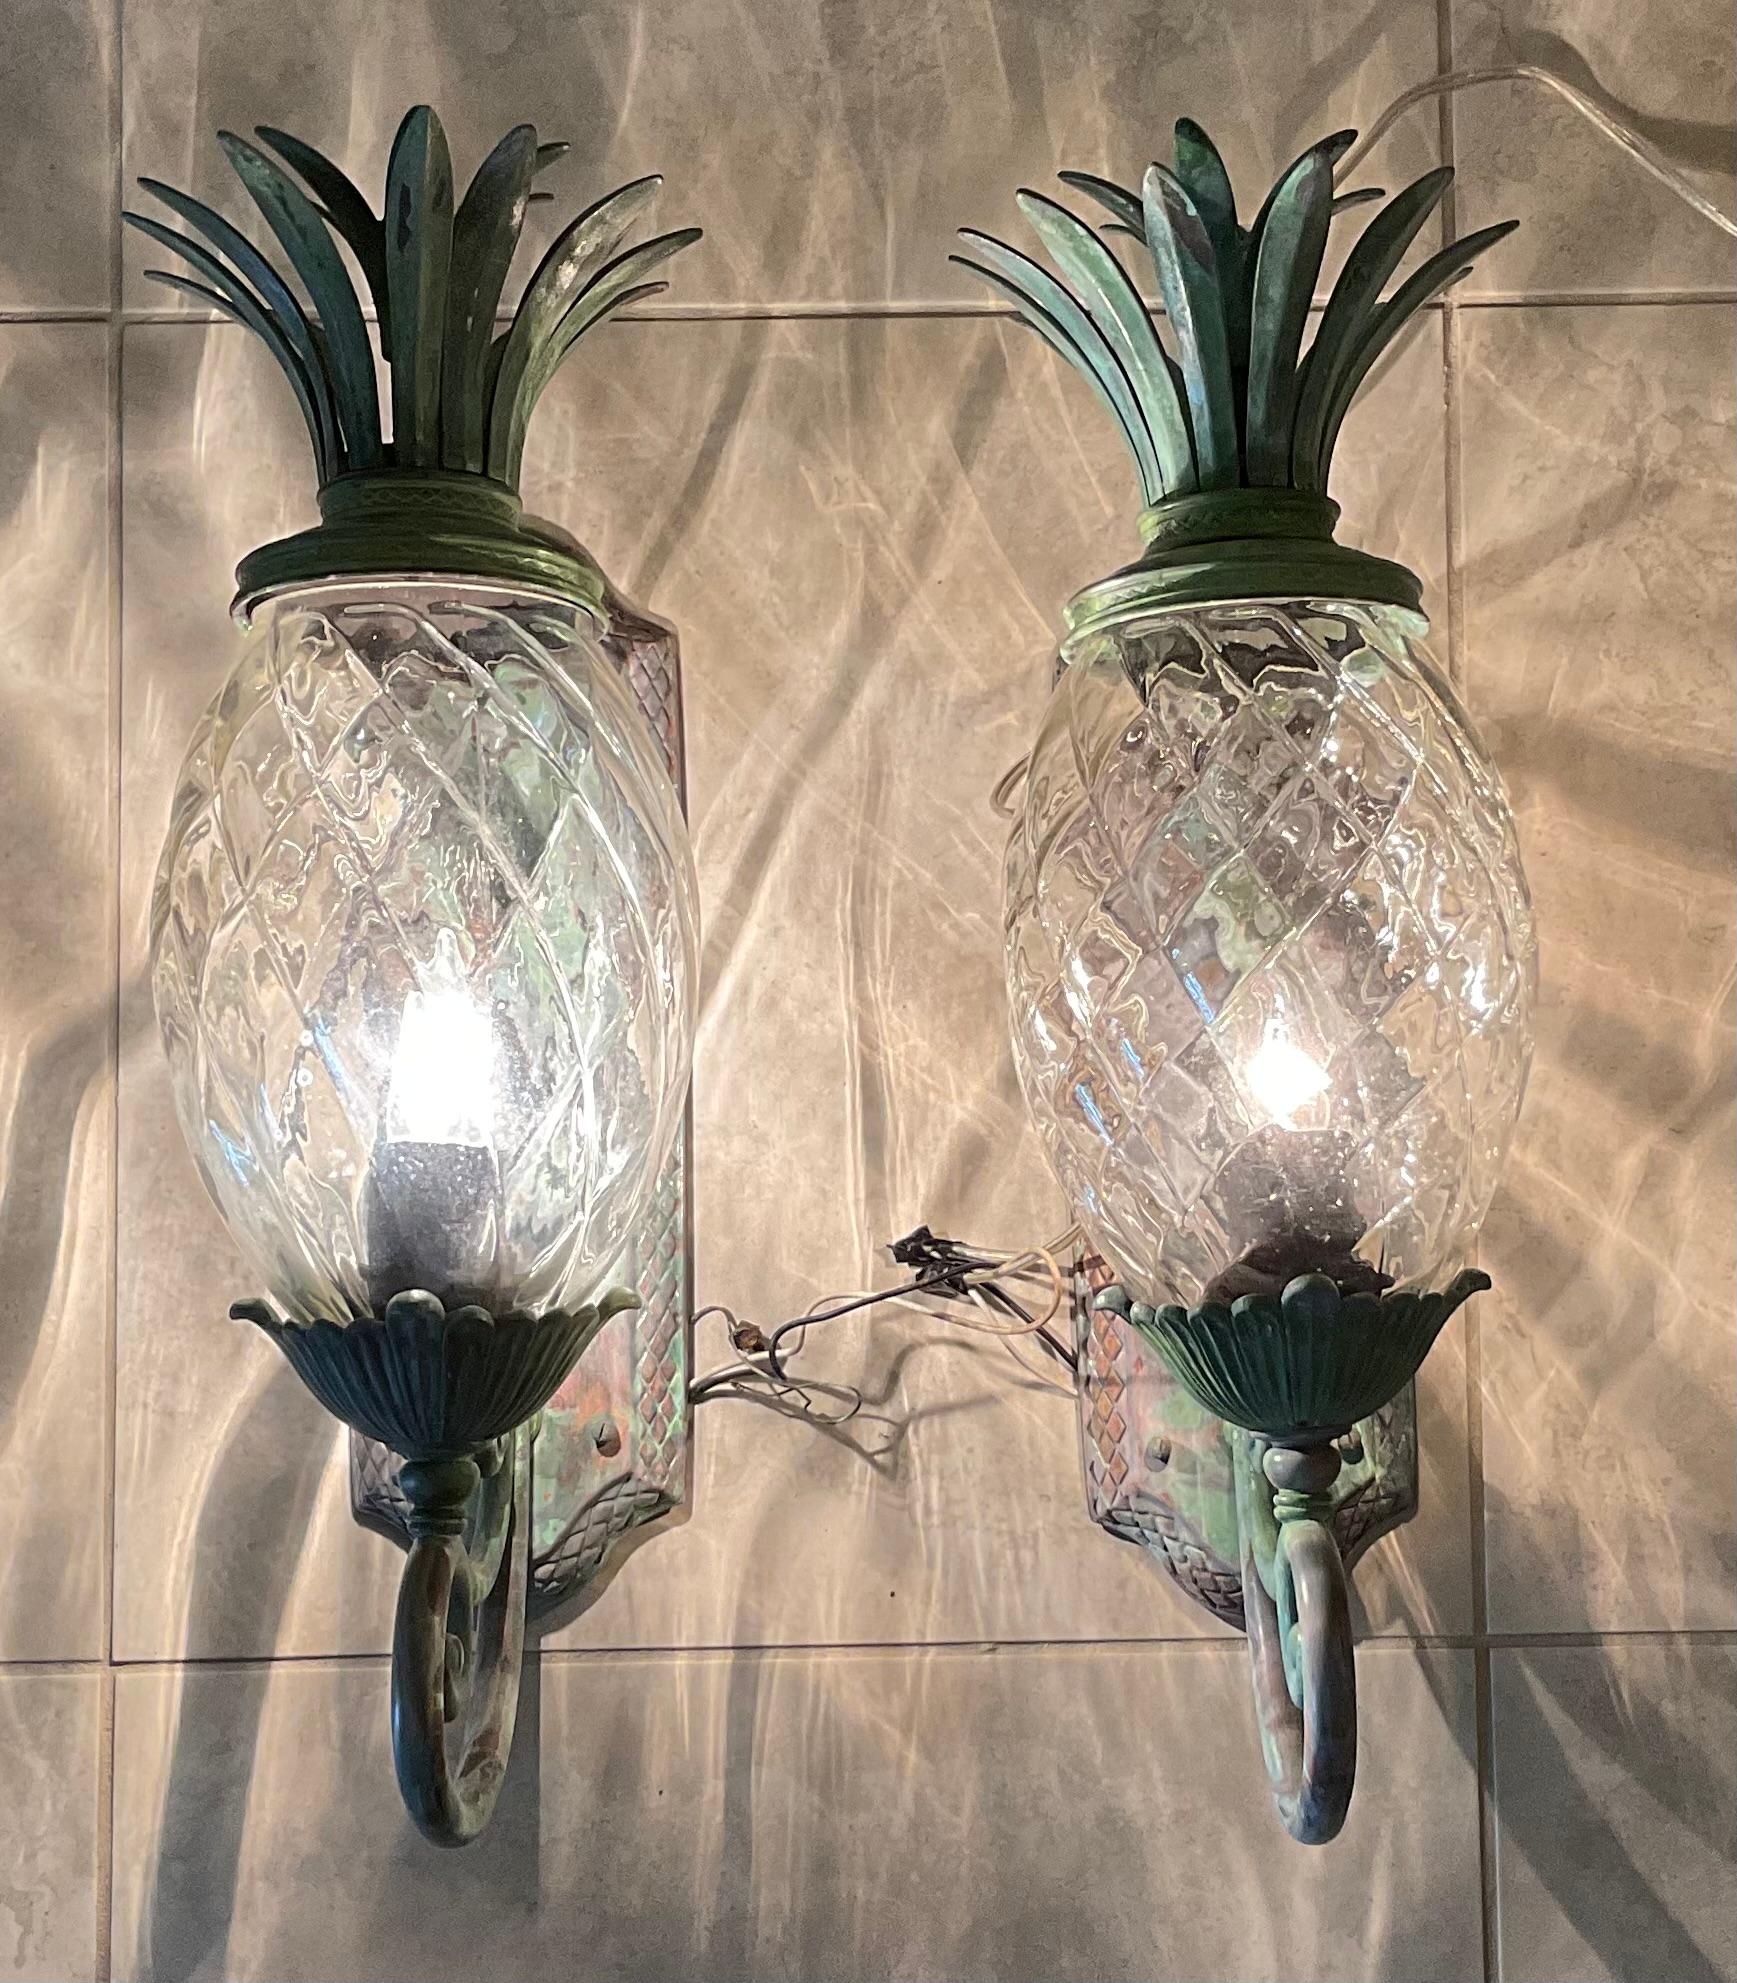 Beautiful pair of pineapple wall lights, made of bronze and solid brass with one 60/watt light each , great patina , decorative for indoor or outdoor.
Ready to use